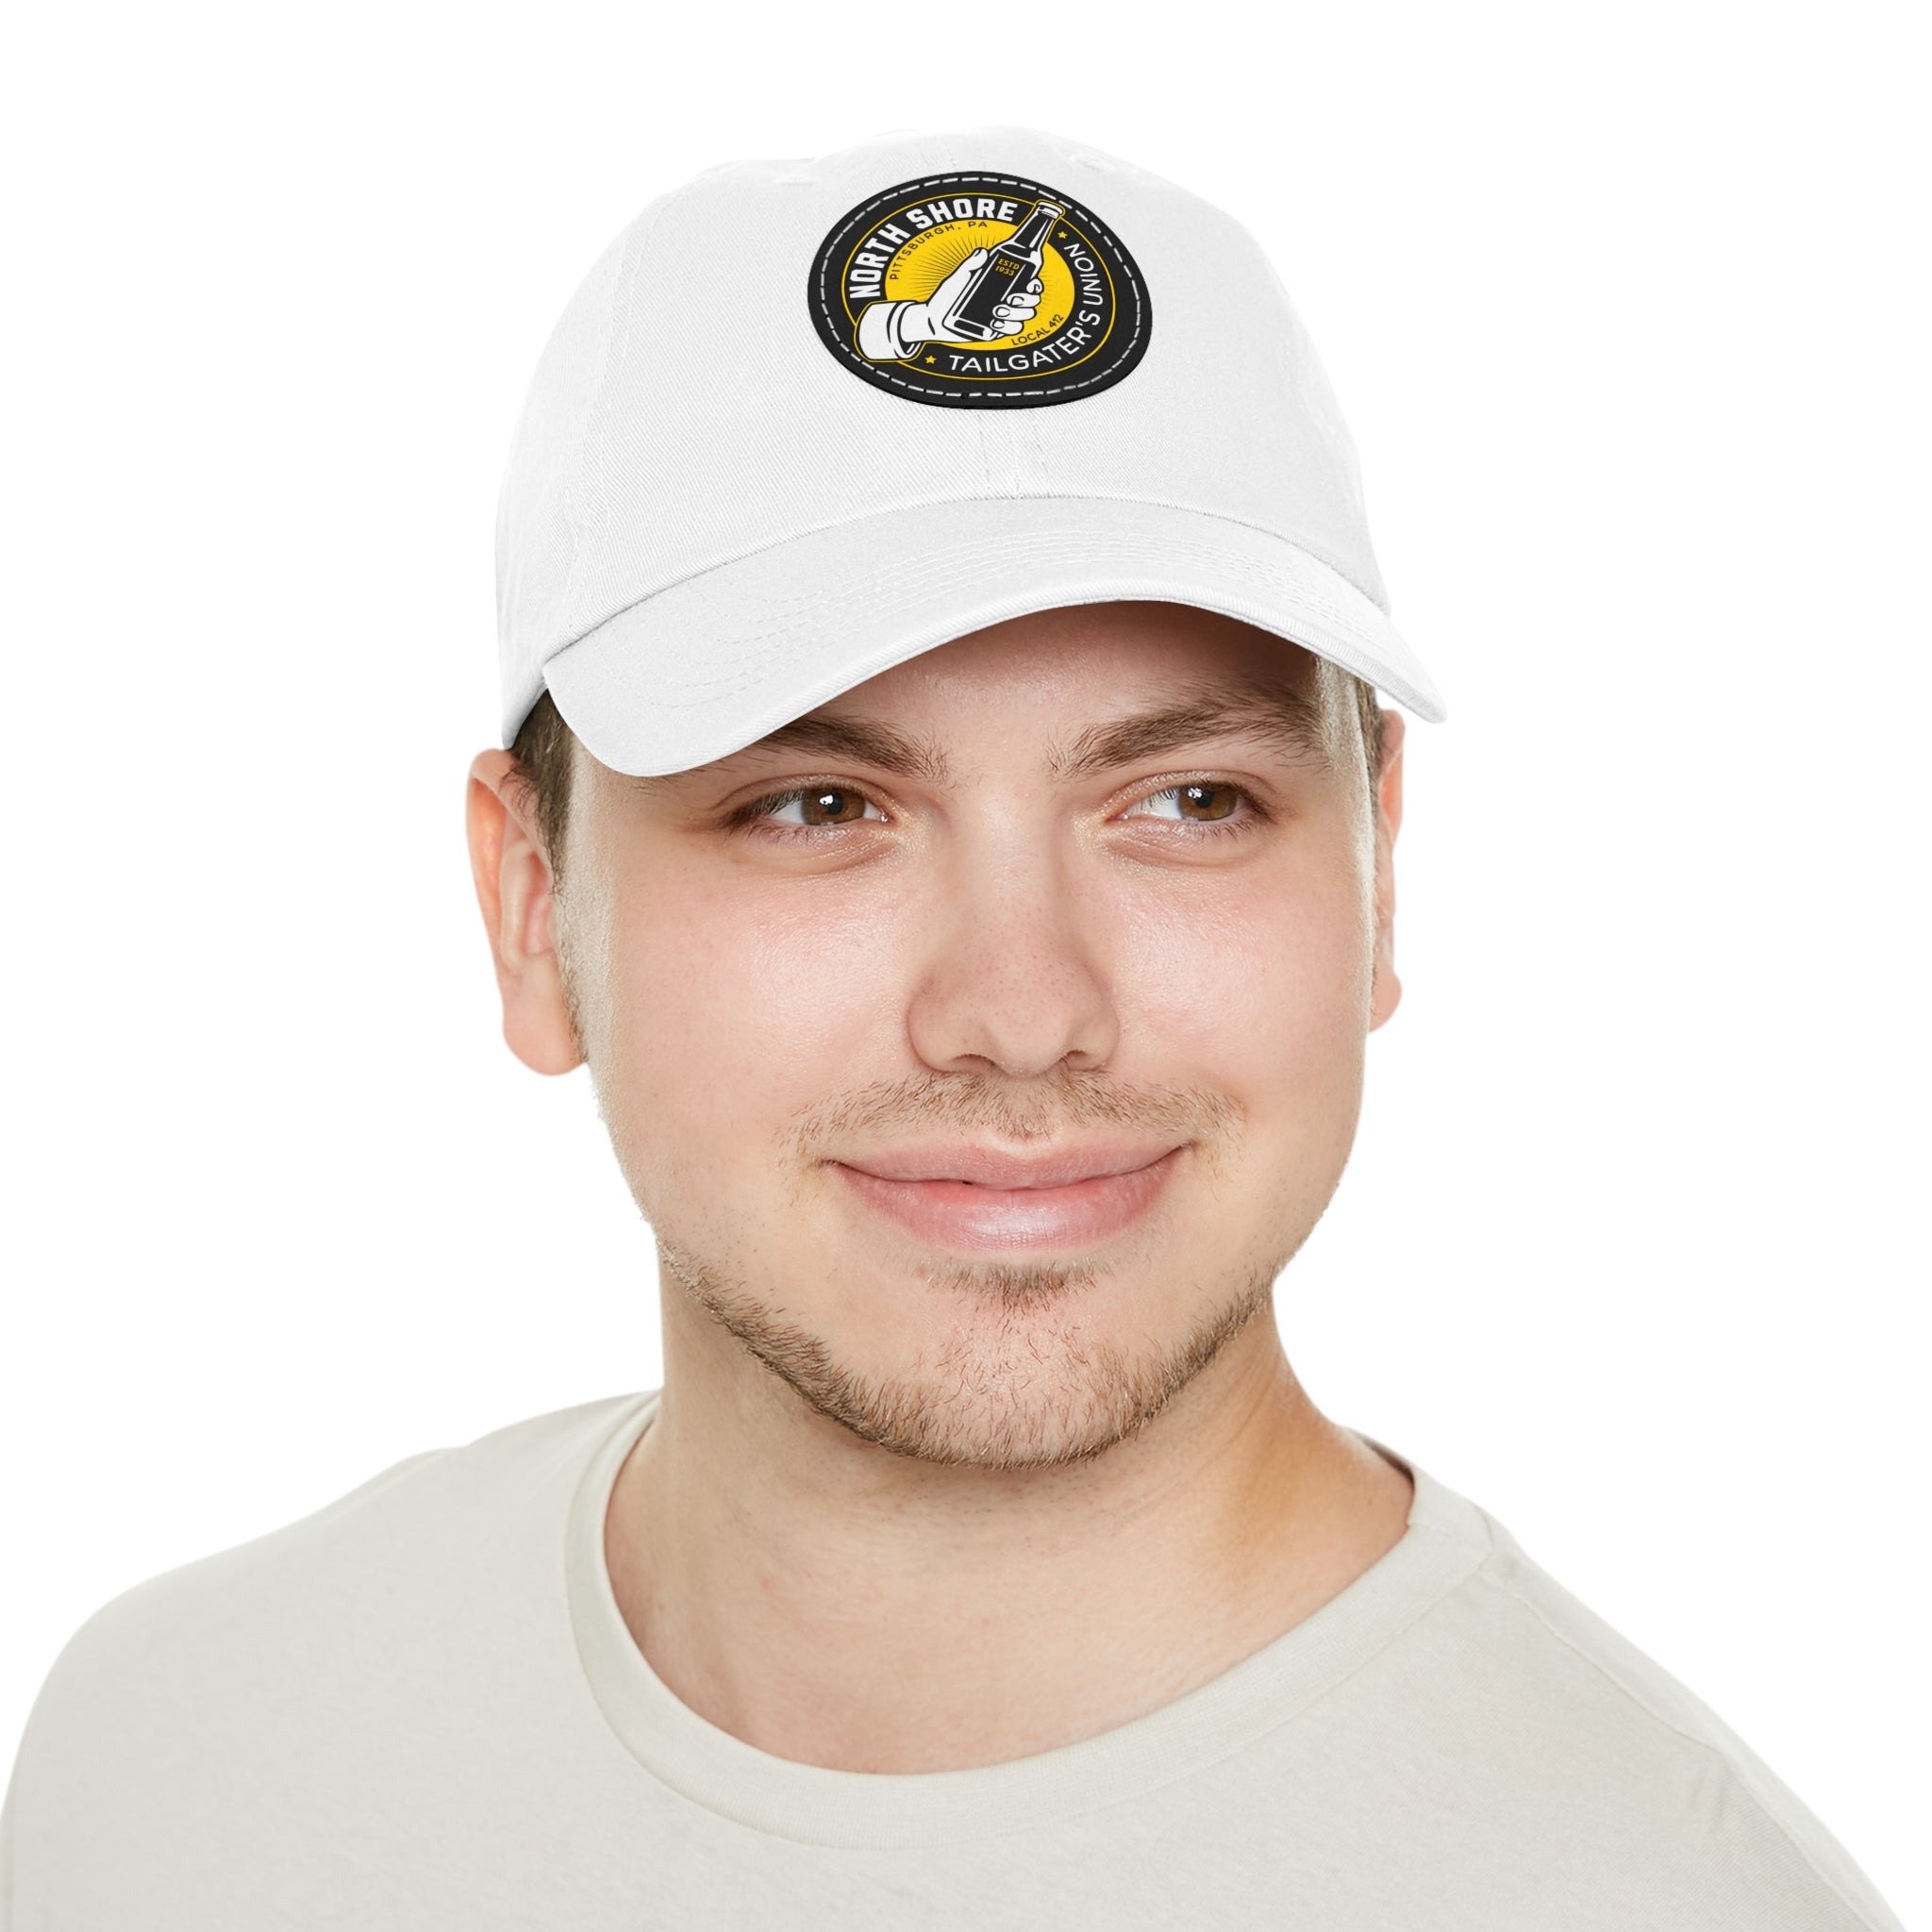 North Shore Tailgater's Union - Printed Patch Dad Hat - Yinzylvania